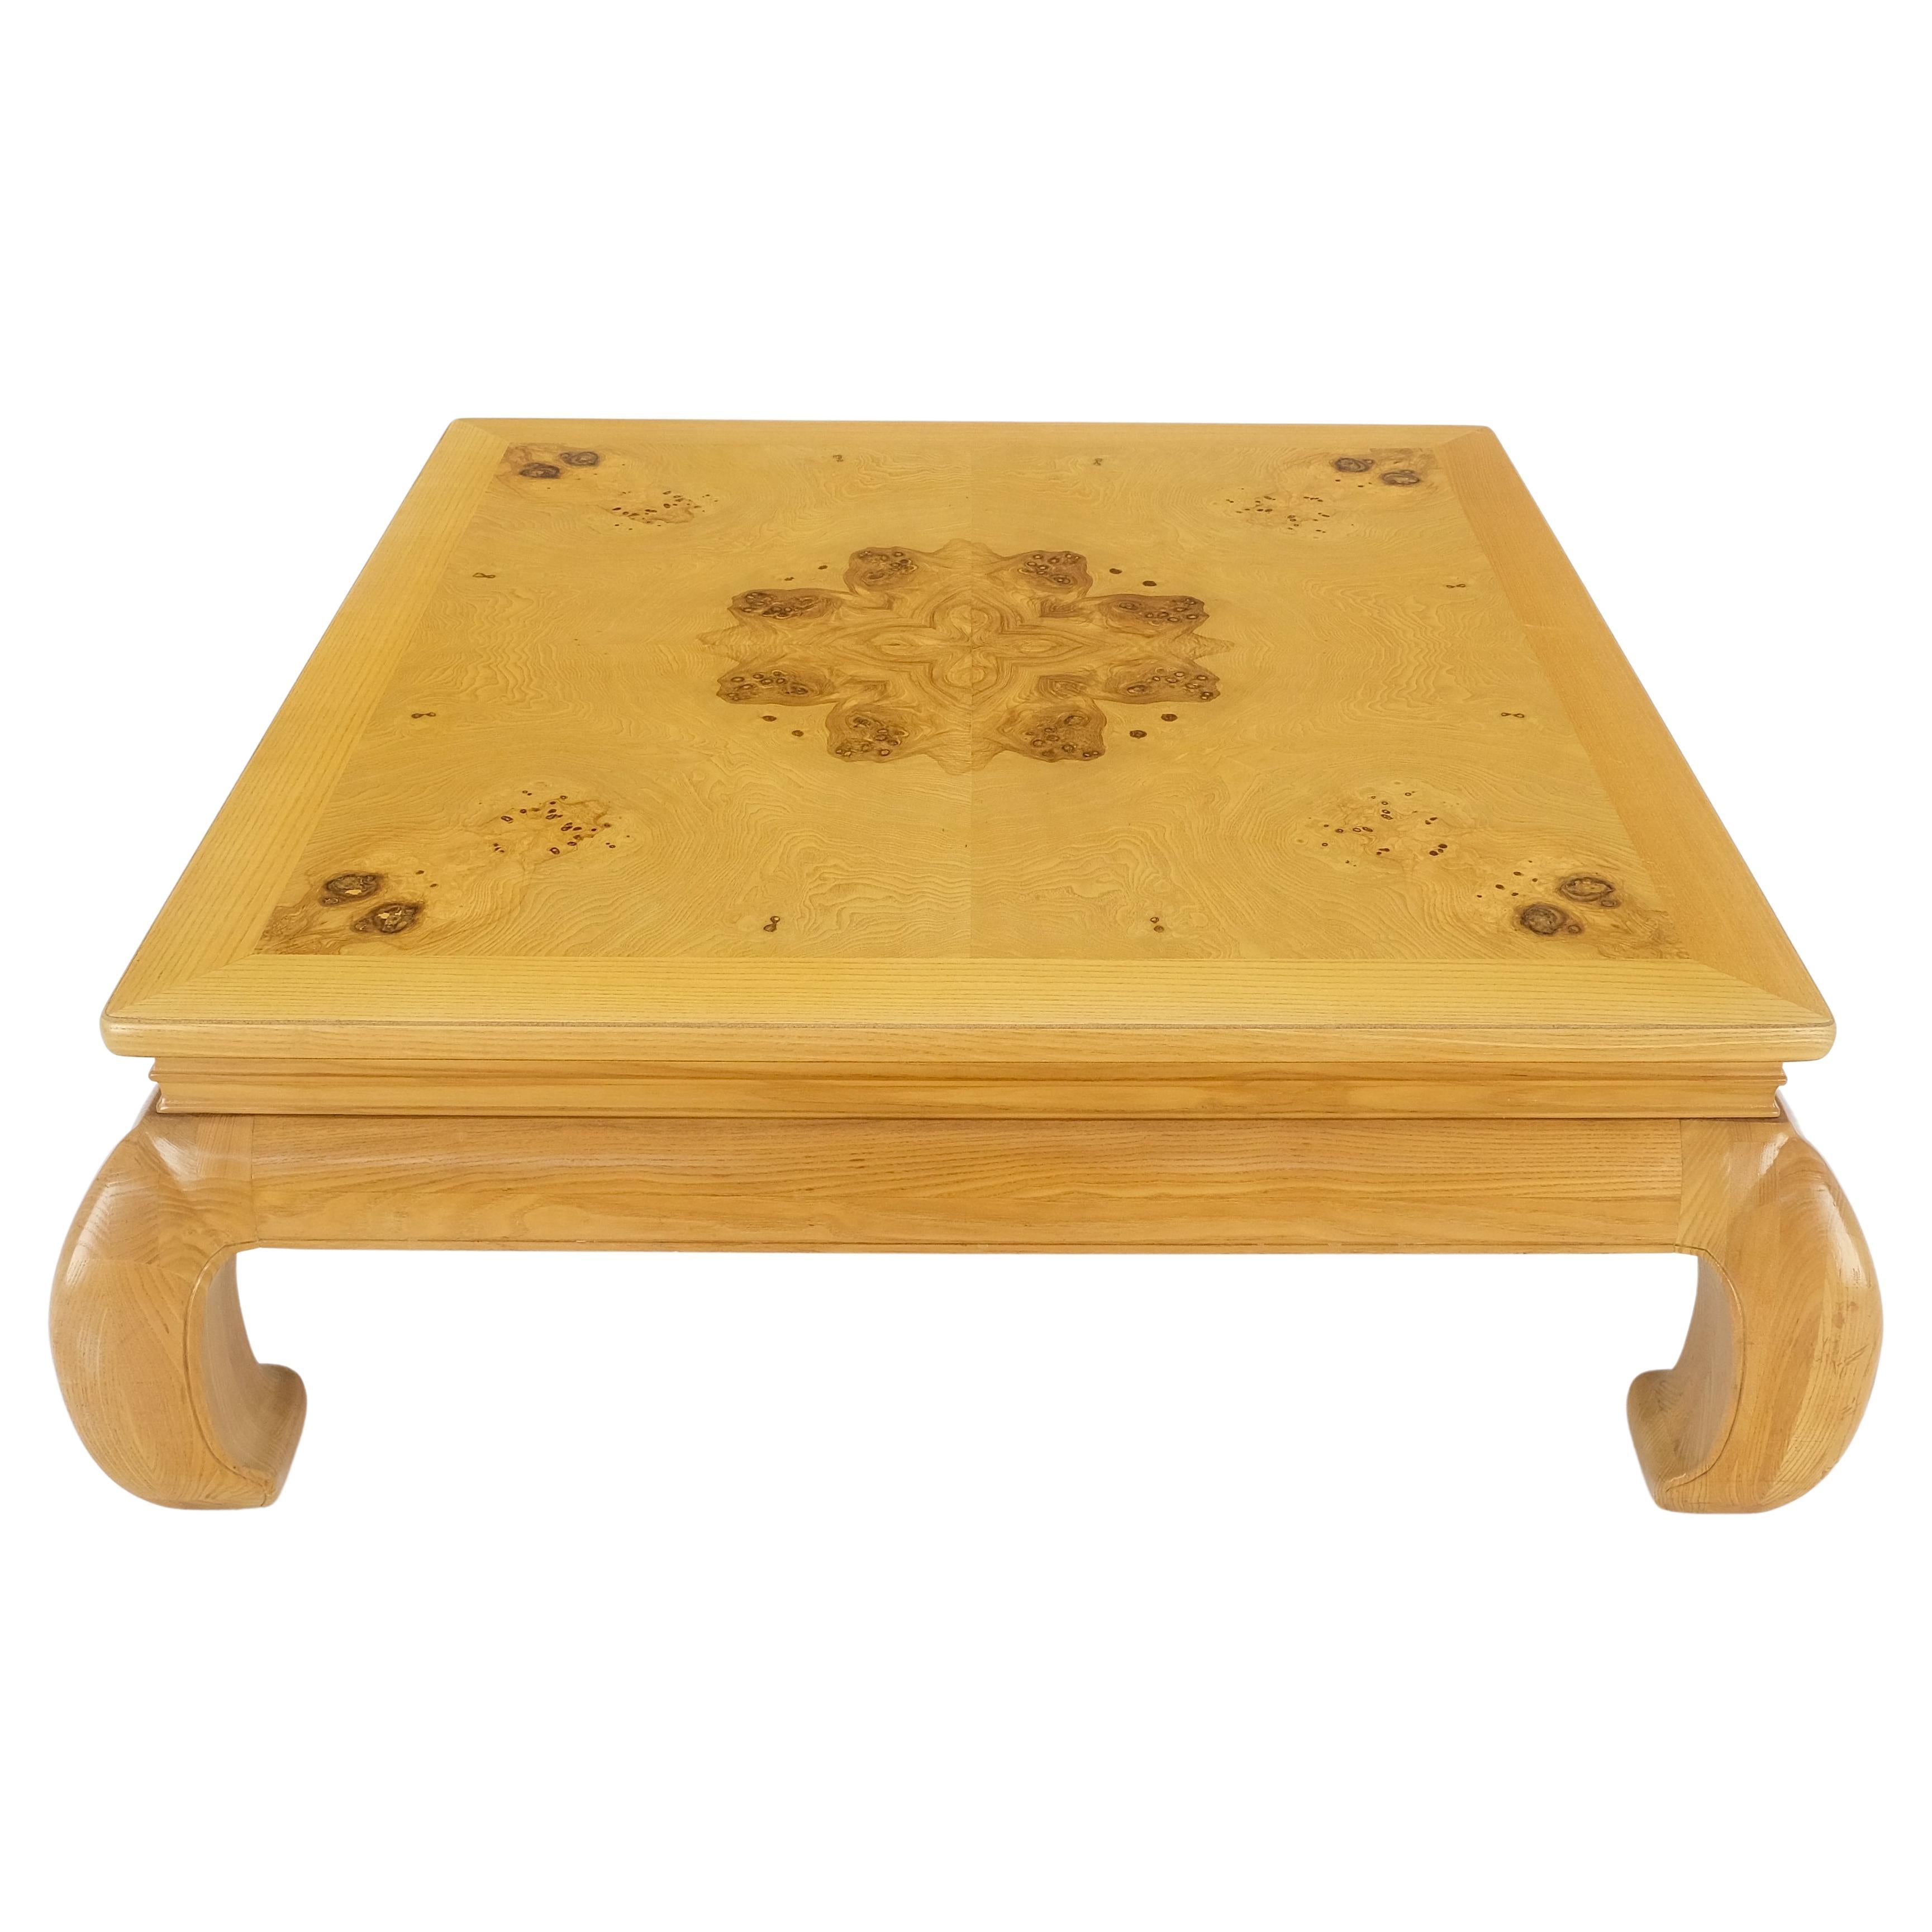 Large 4' Square Burl Wood Top Massive Legs Oriental Chinese Coffee Center Table For Sale